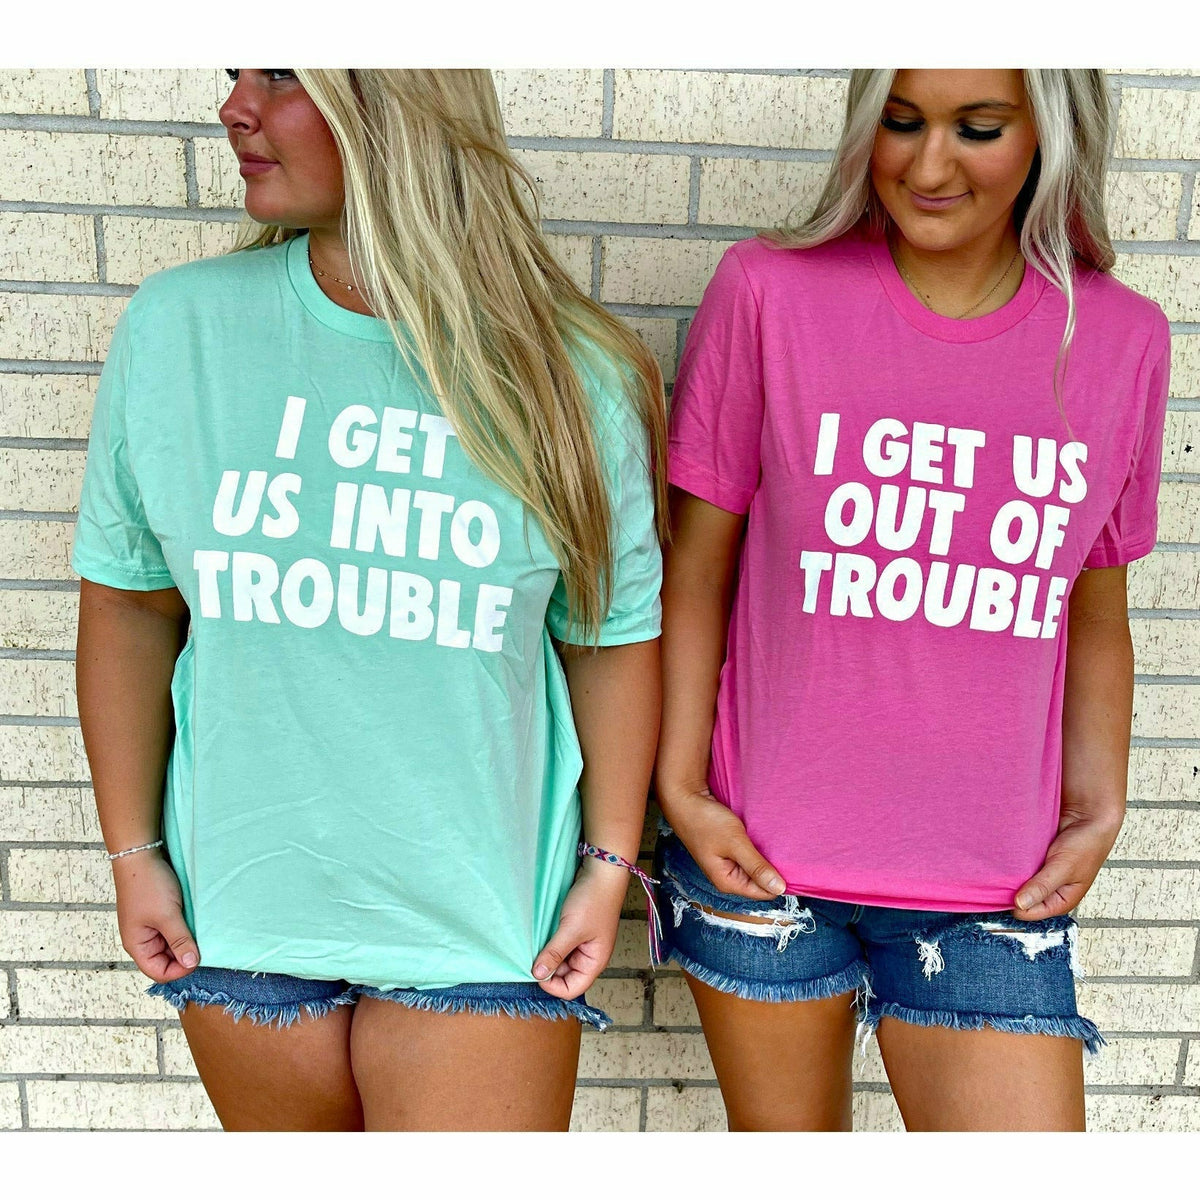 I get us into trouble/ I get us out of trouble tees by Gabriel Clothing Company